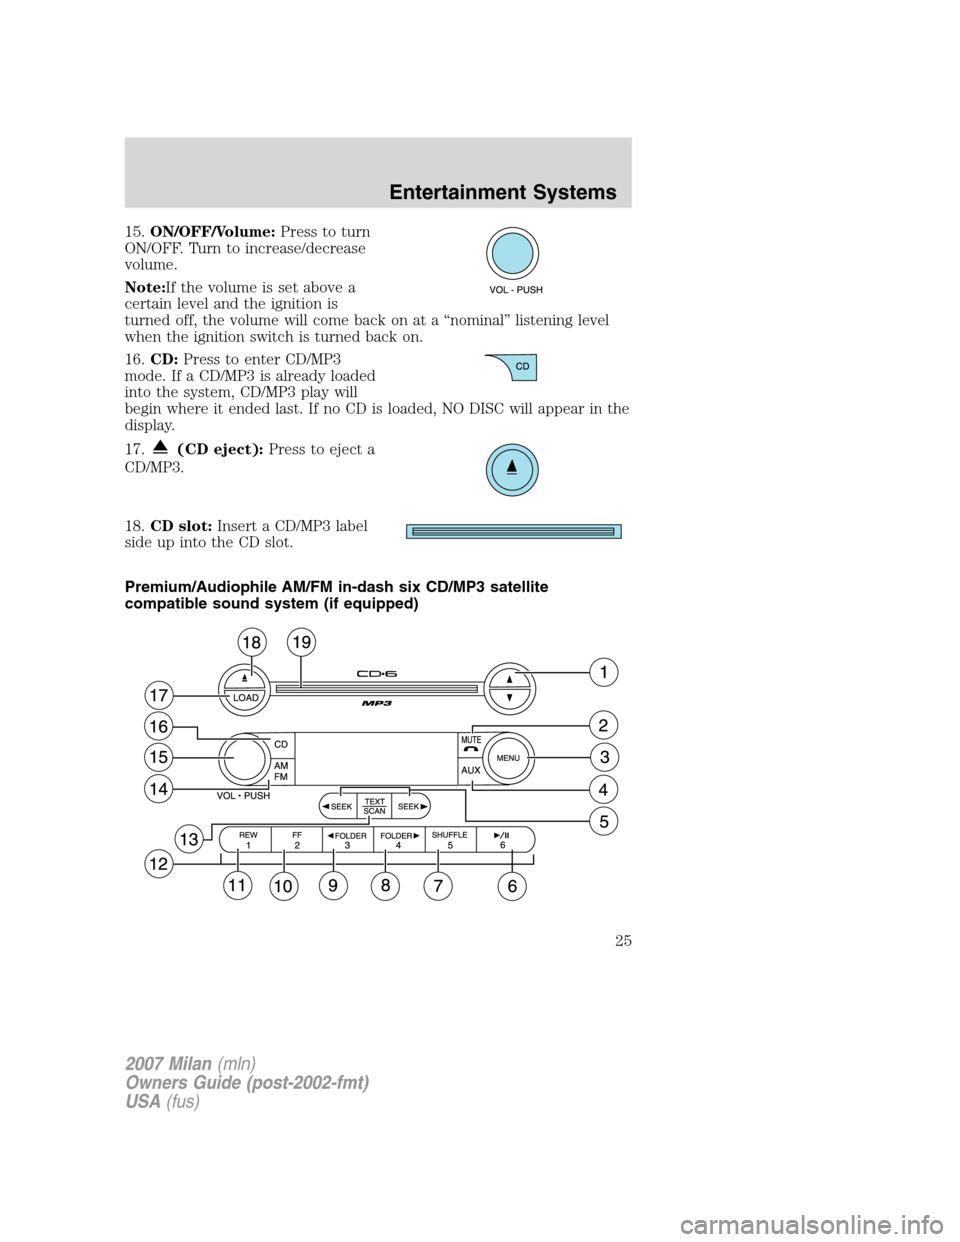 Mercury Milan 2007  Owners Manuals 15.ON/OFF/Volume:Press to turn
ON/OFF. Turn to increase/decrease
volume.
Note:If the volume is set above a
certain level and the ignition is
turned off, the volume will come back on at a “nominal”